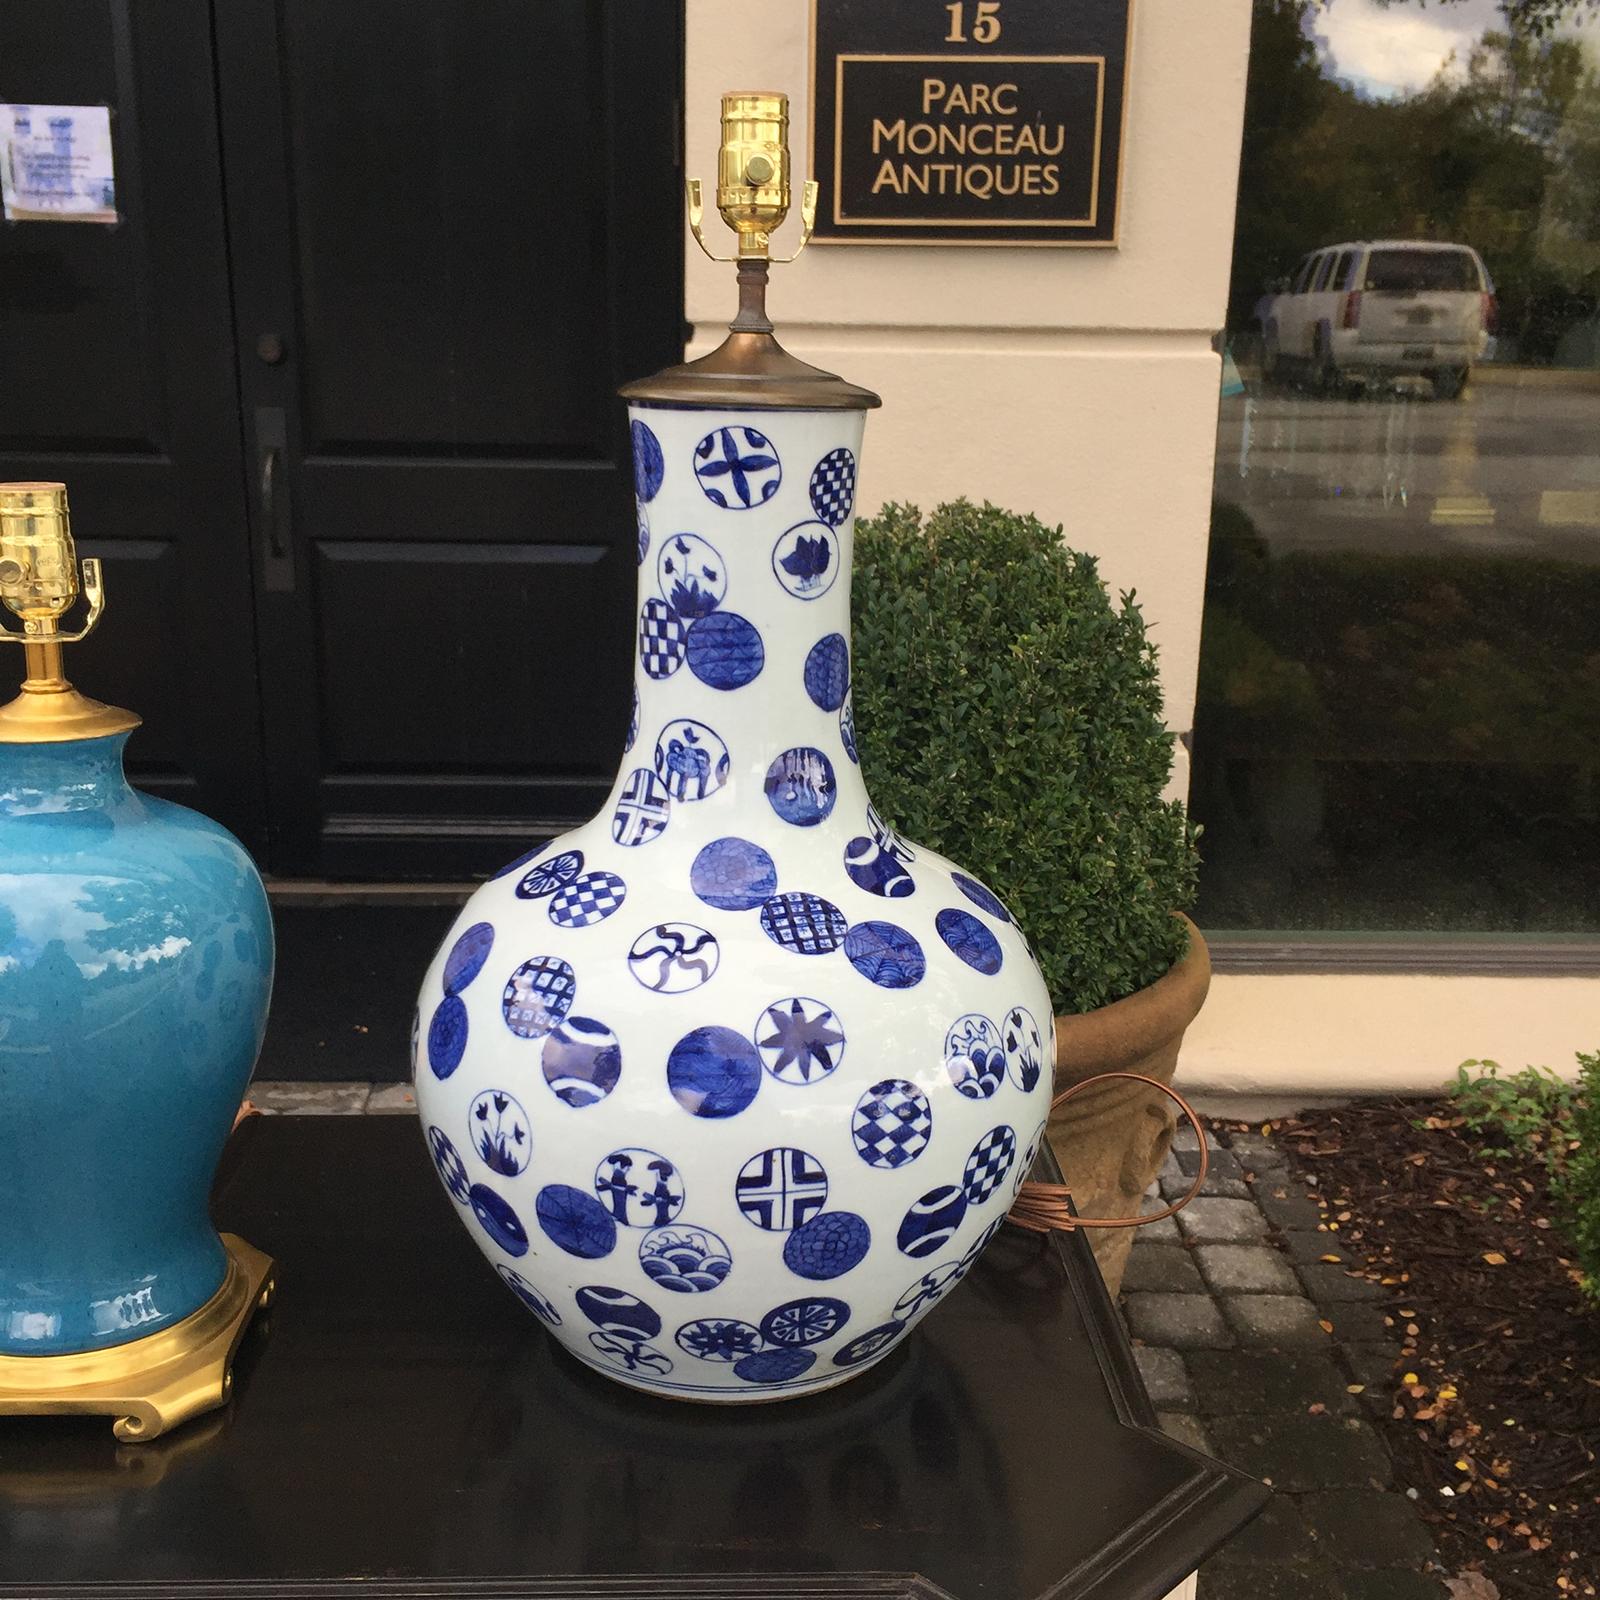 19th-20th century Chinese blue and white porcelain vase as lamp
New wiring.